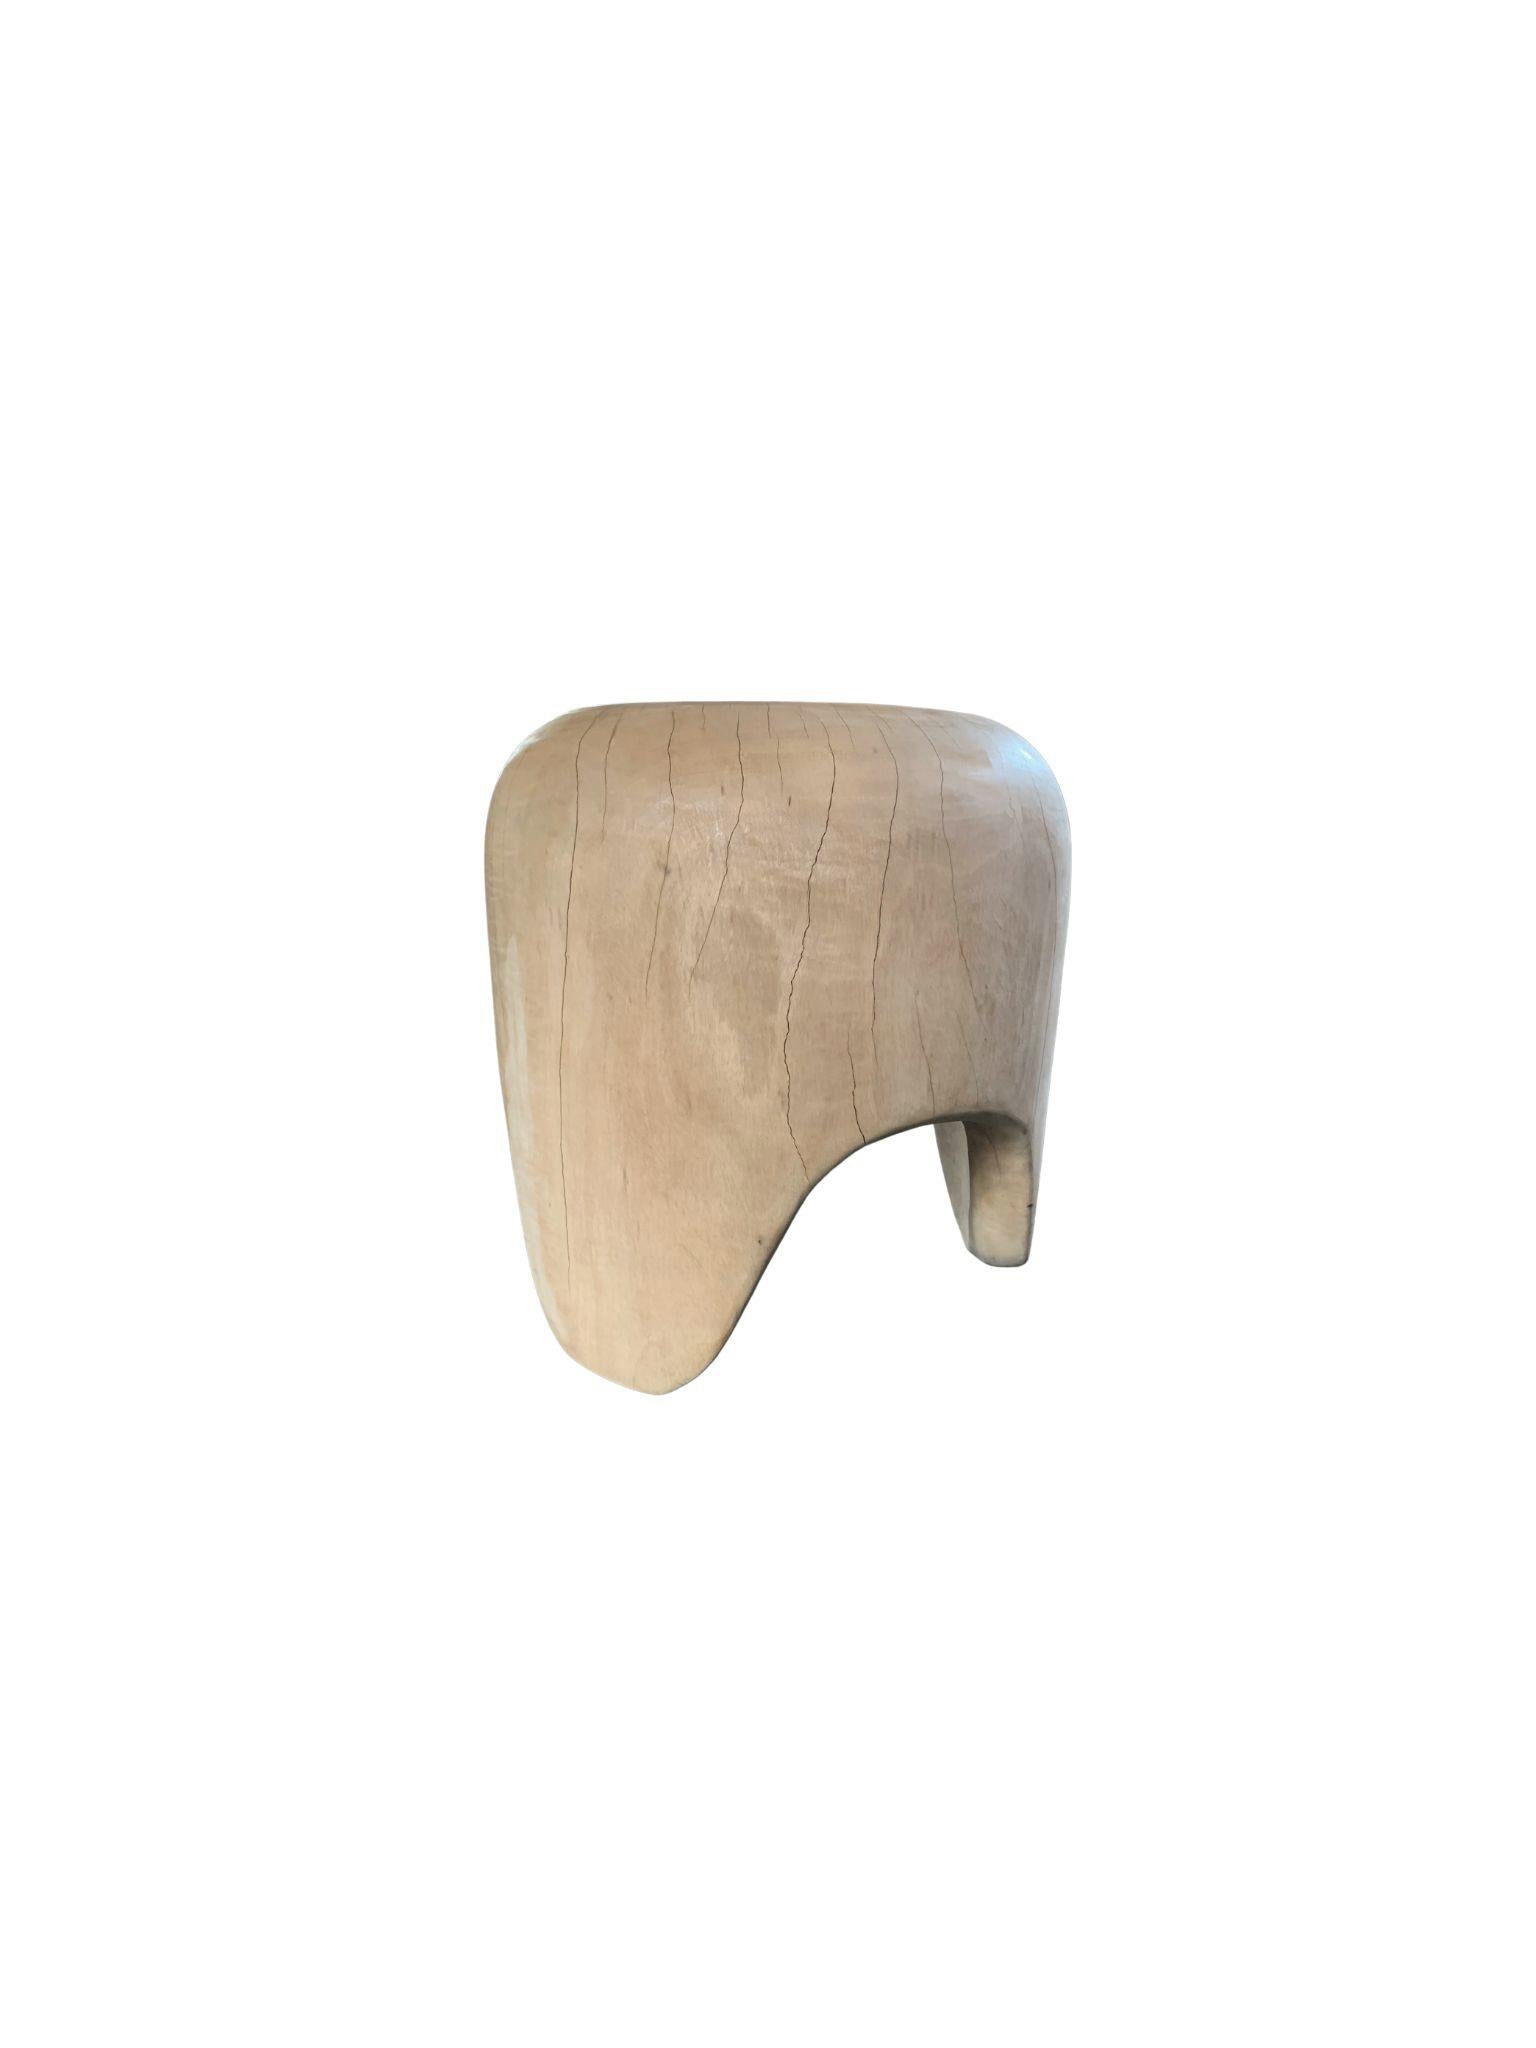 Indonesian Sculptural Side Table Solid Mango Wood with Arched Legs For Sale